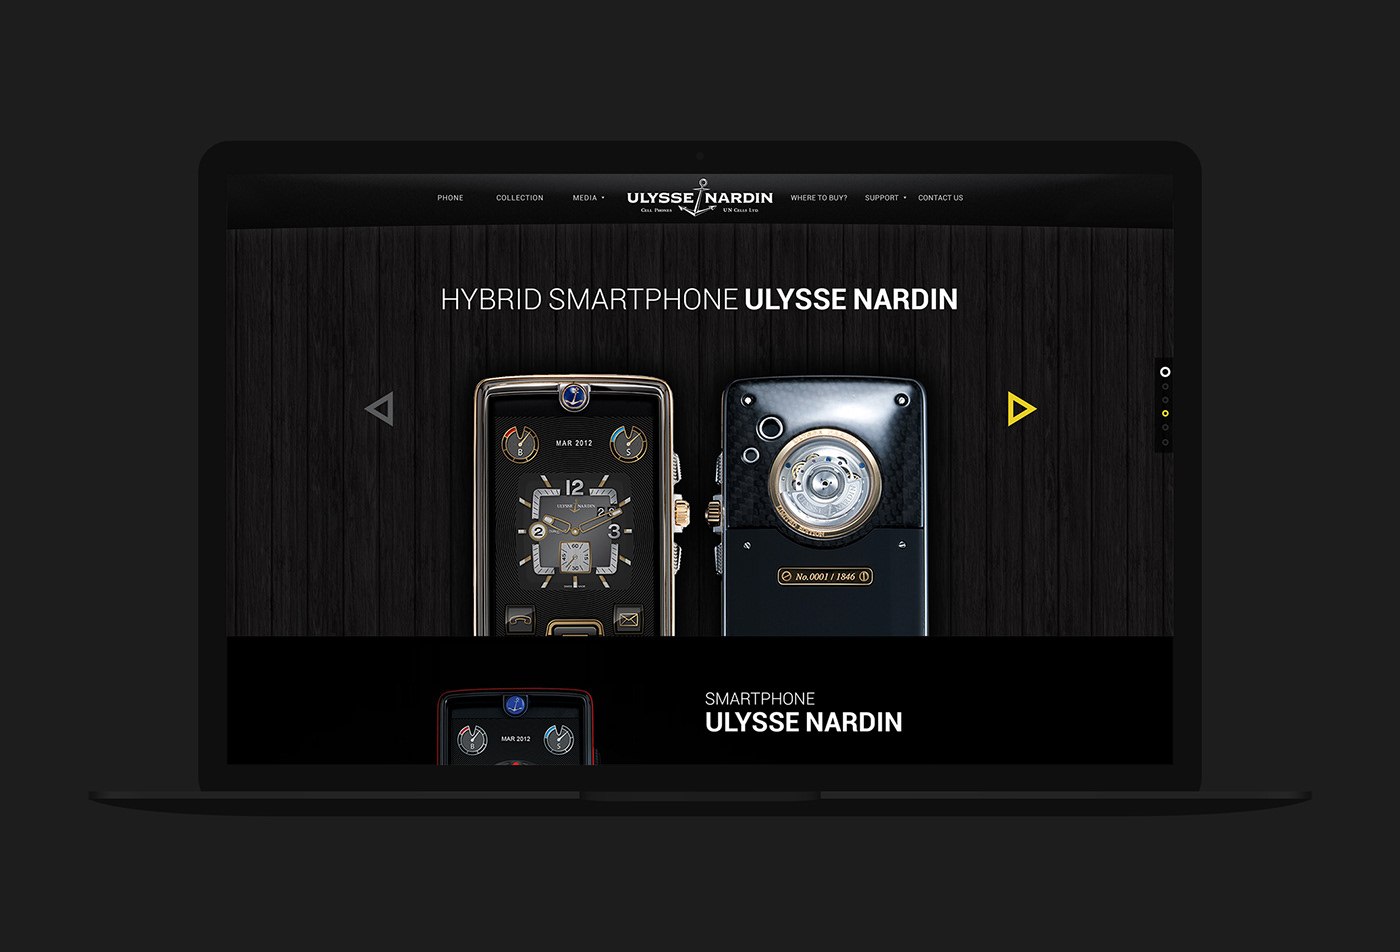 Ulysse Nardin smartphones phones uncell expensive phones exclusive phones e-commerce web shop uncell.ru synergize Website basovdesign Russia